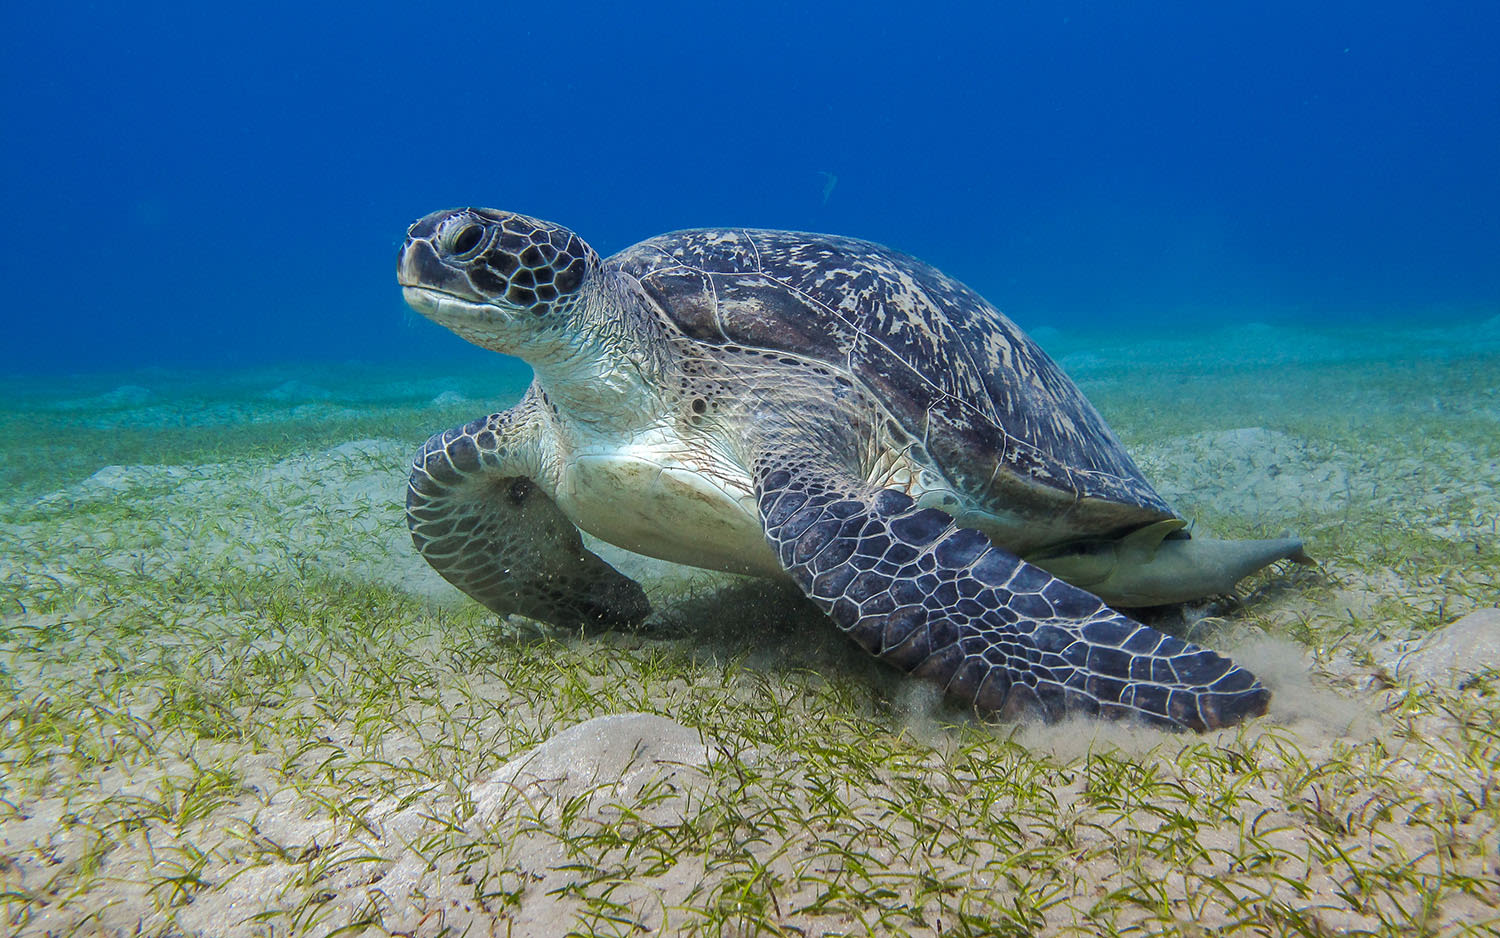 A giant sea turtle under the water